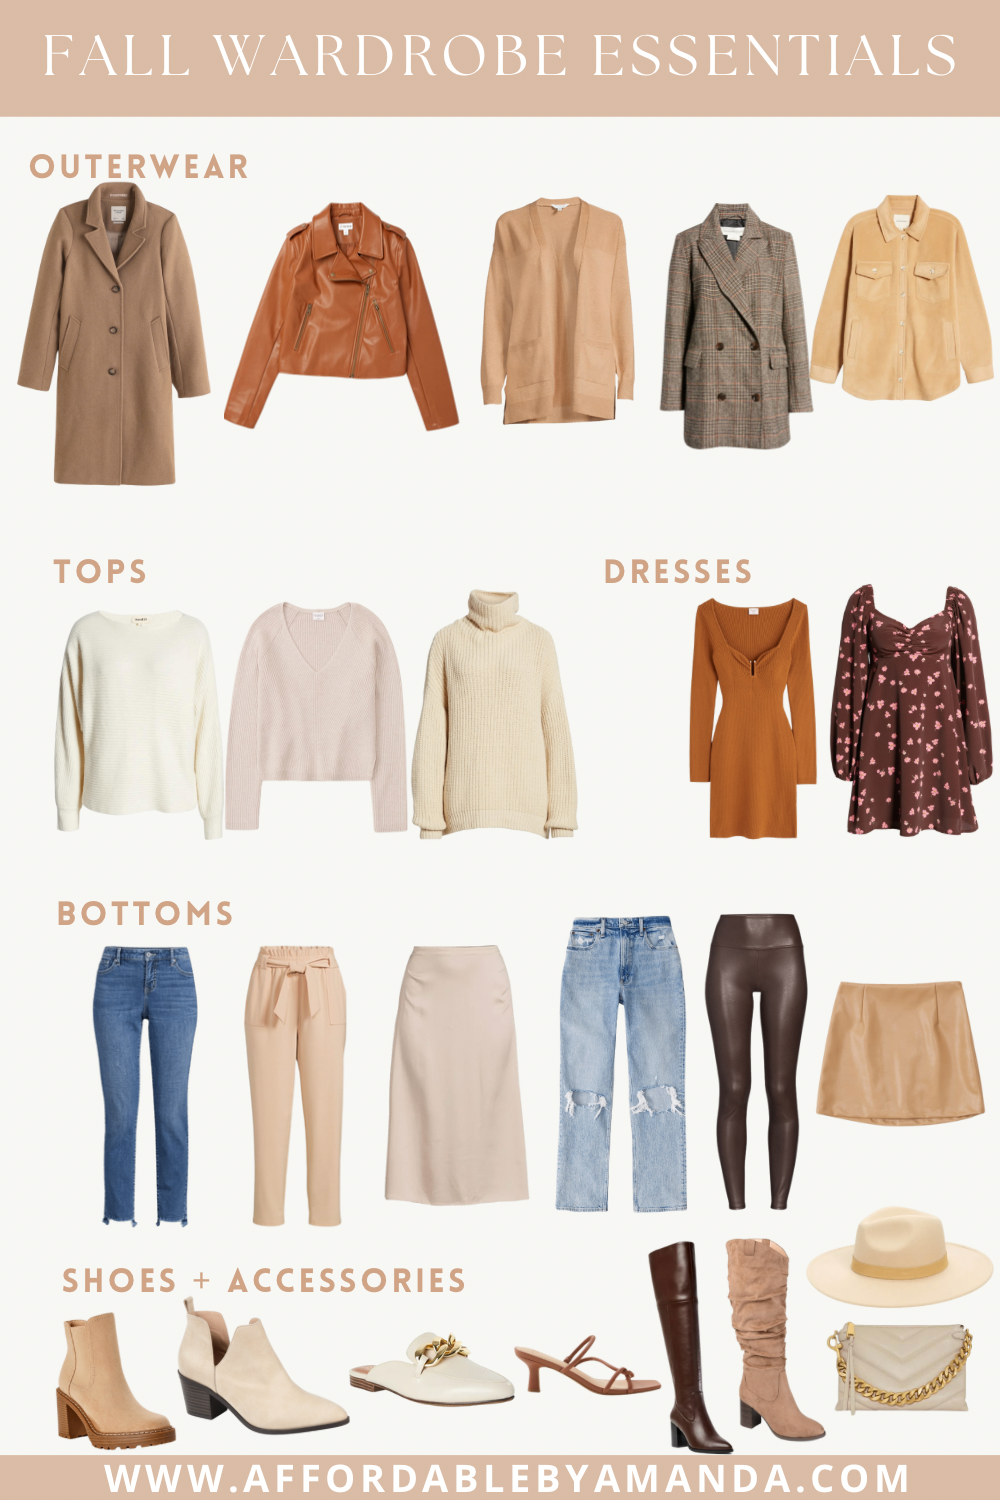 Must-Have Fall Wardrobe Essentials 2022 | Fall Essentials for Women | What should I have in my fall wardrobe?